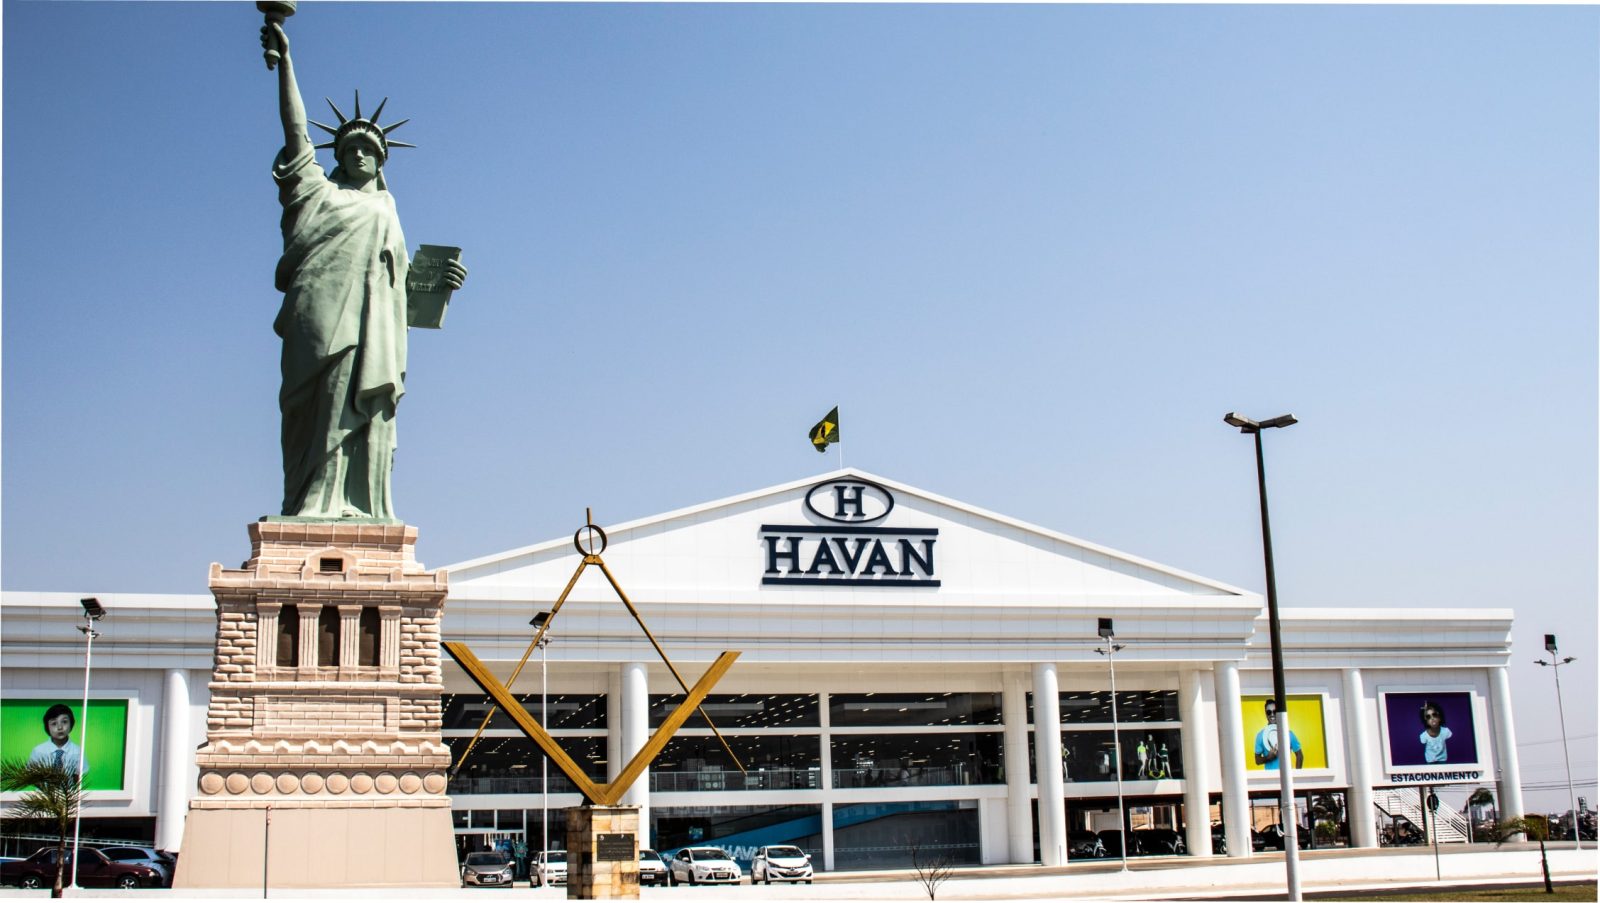 One of the HAVAN stores and a replica of the Statue of Liberty in front of it